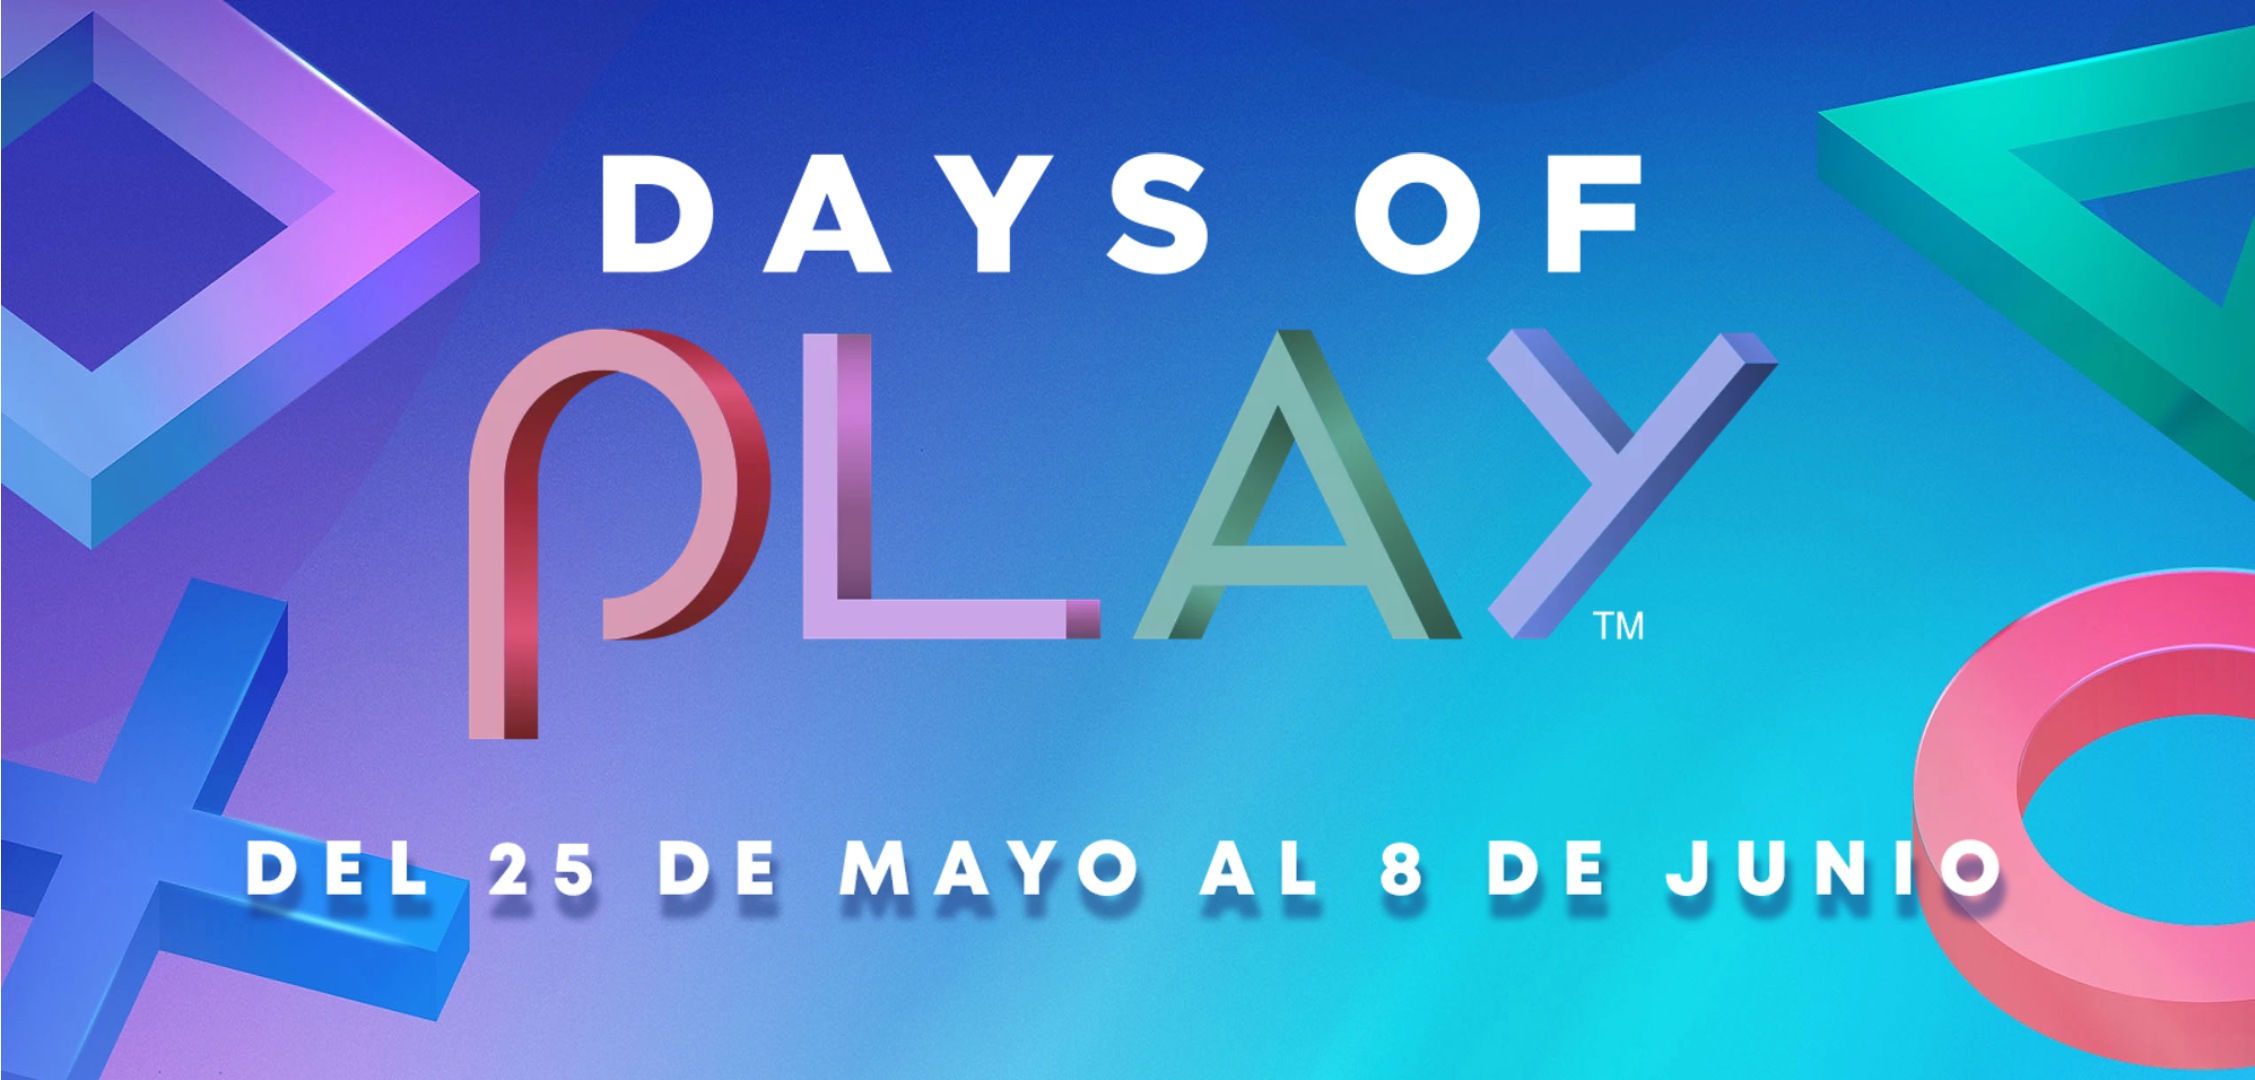 Days of Play descuentos Colombia